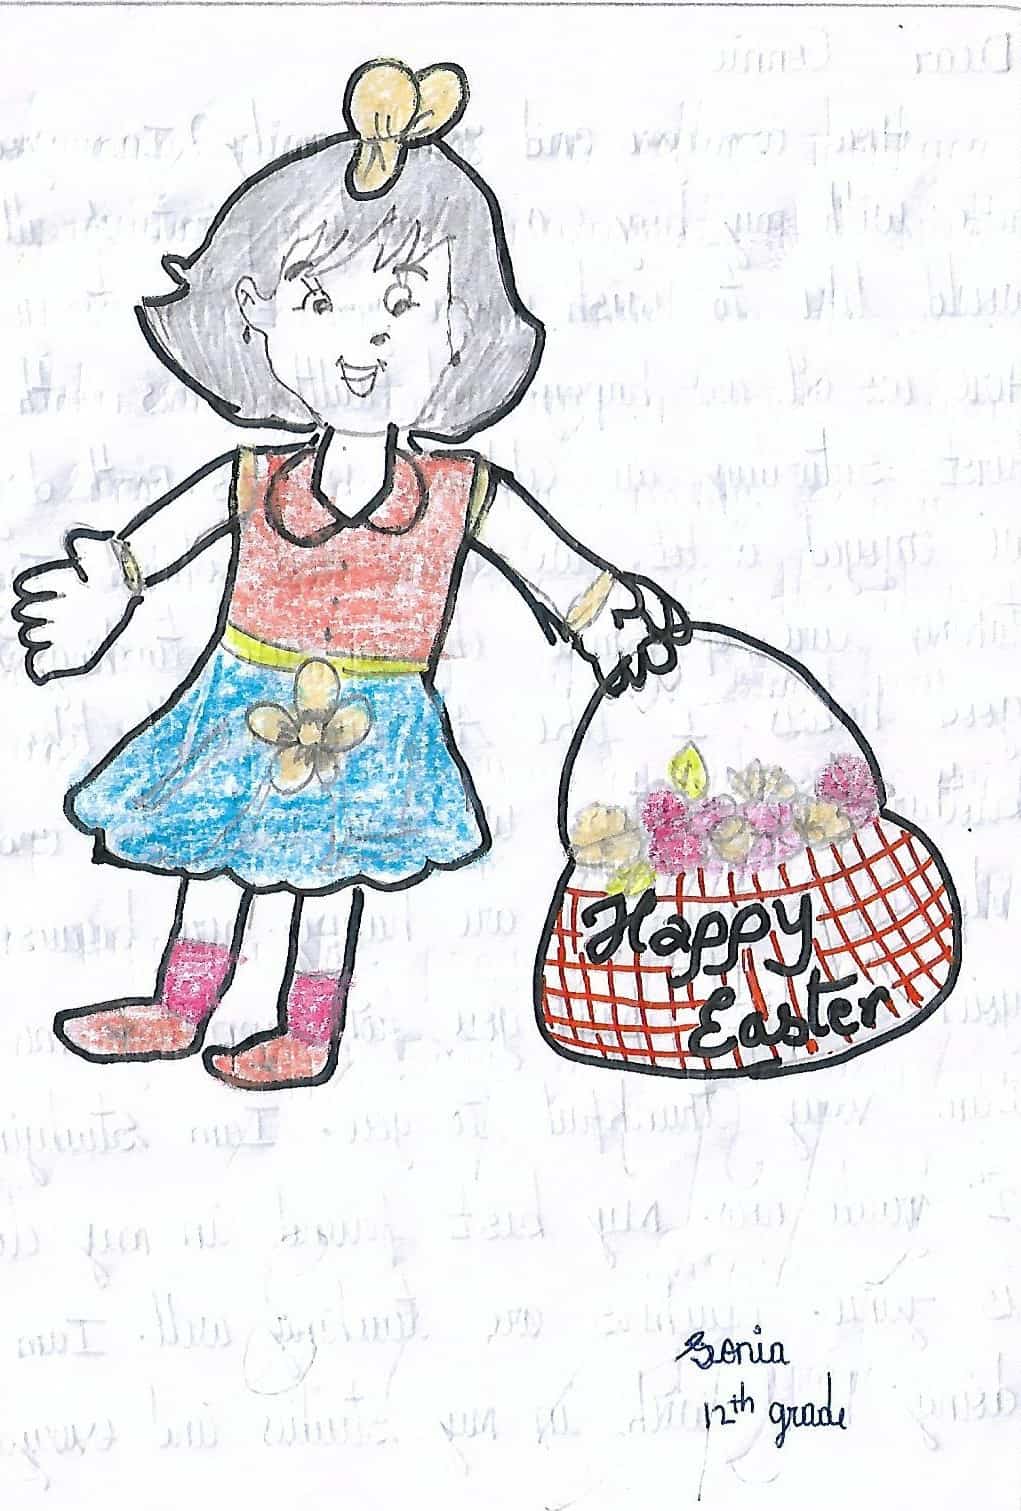 Drawing by a child in India of a girl with a basket and Happy Easter